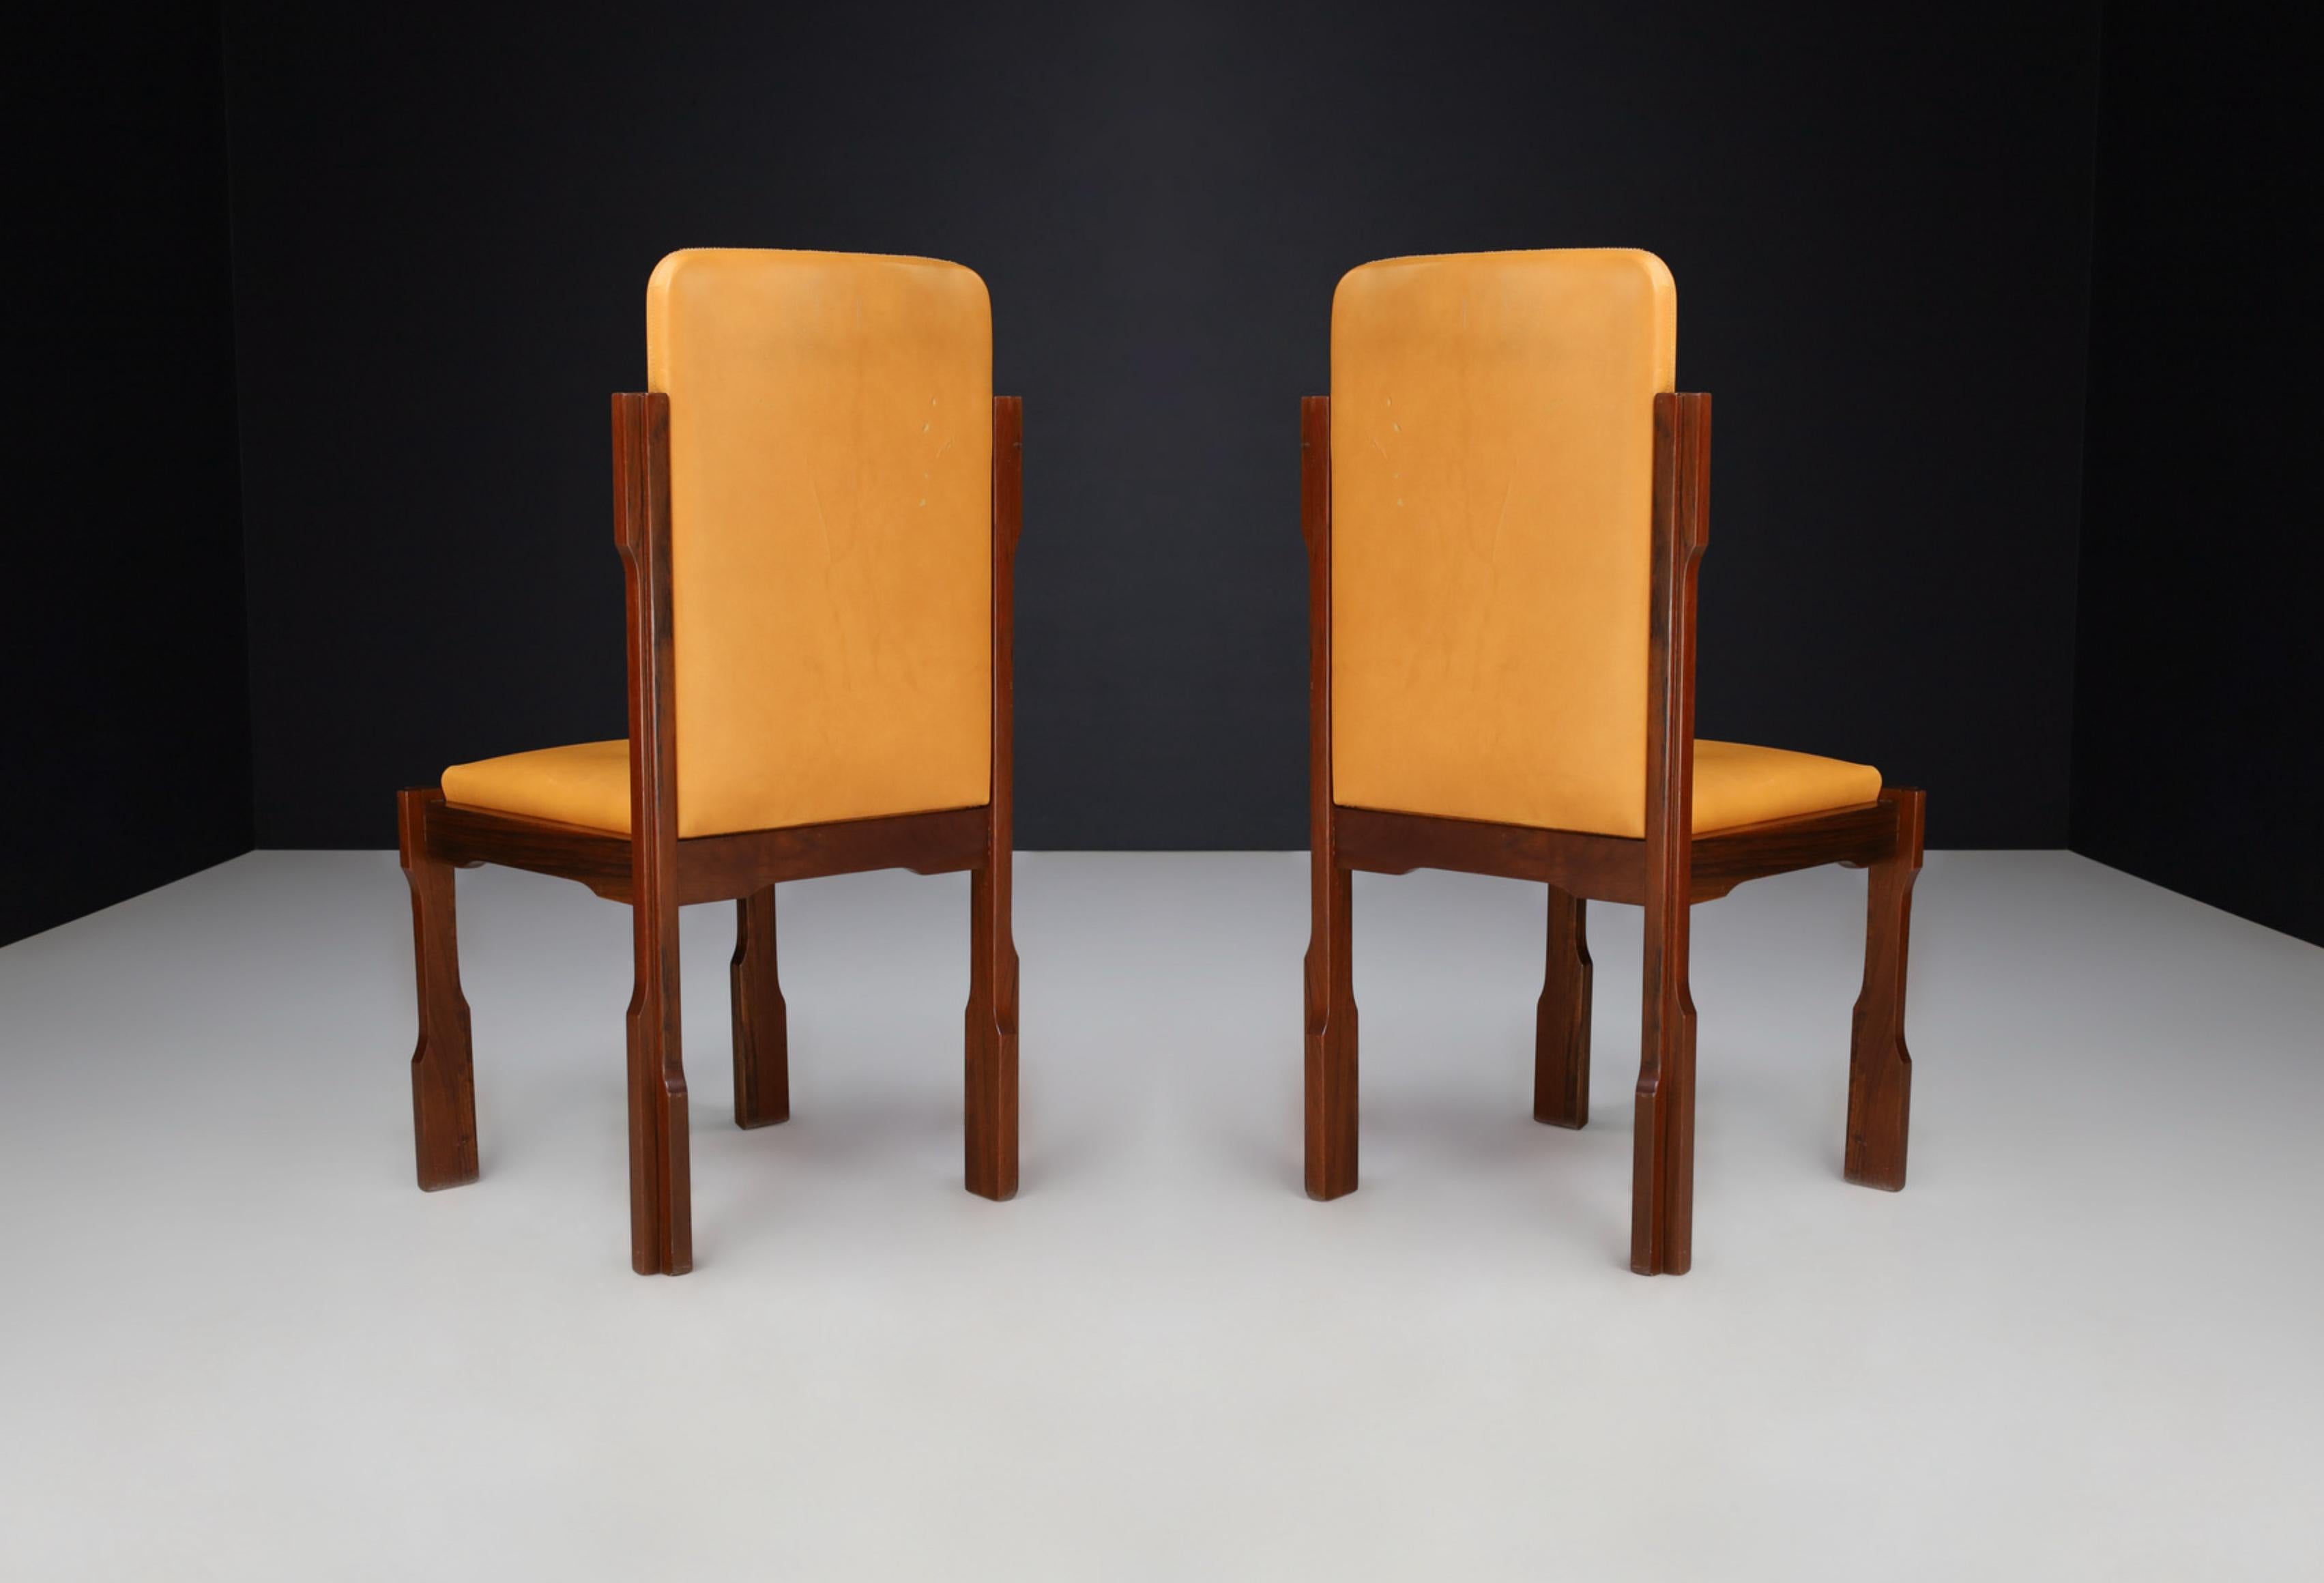 Italian Luciano Frigerio Walnut and Leather Desk Chairs, Italy 1970s  For Sale